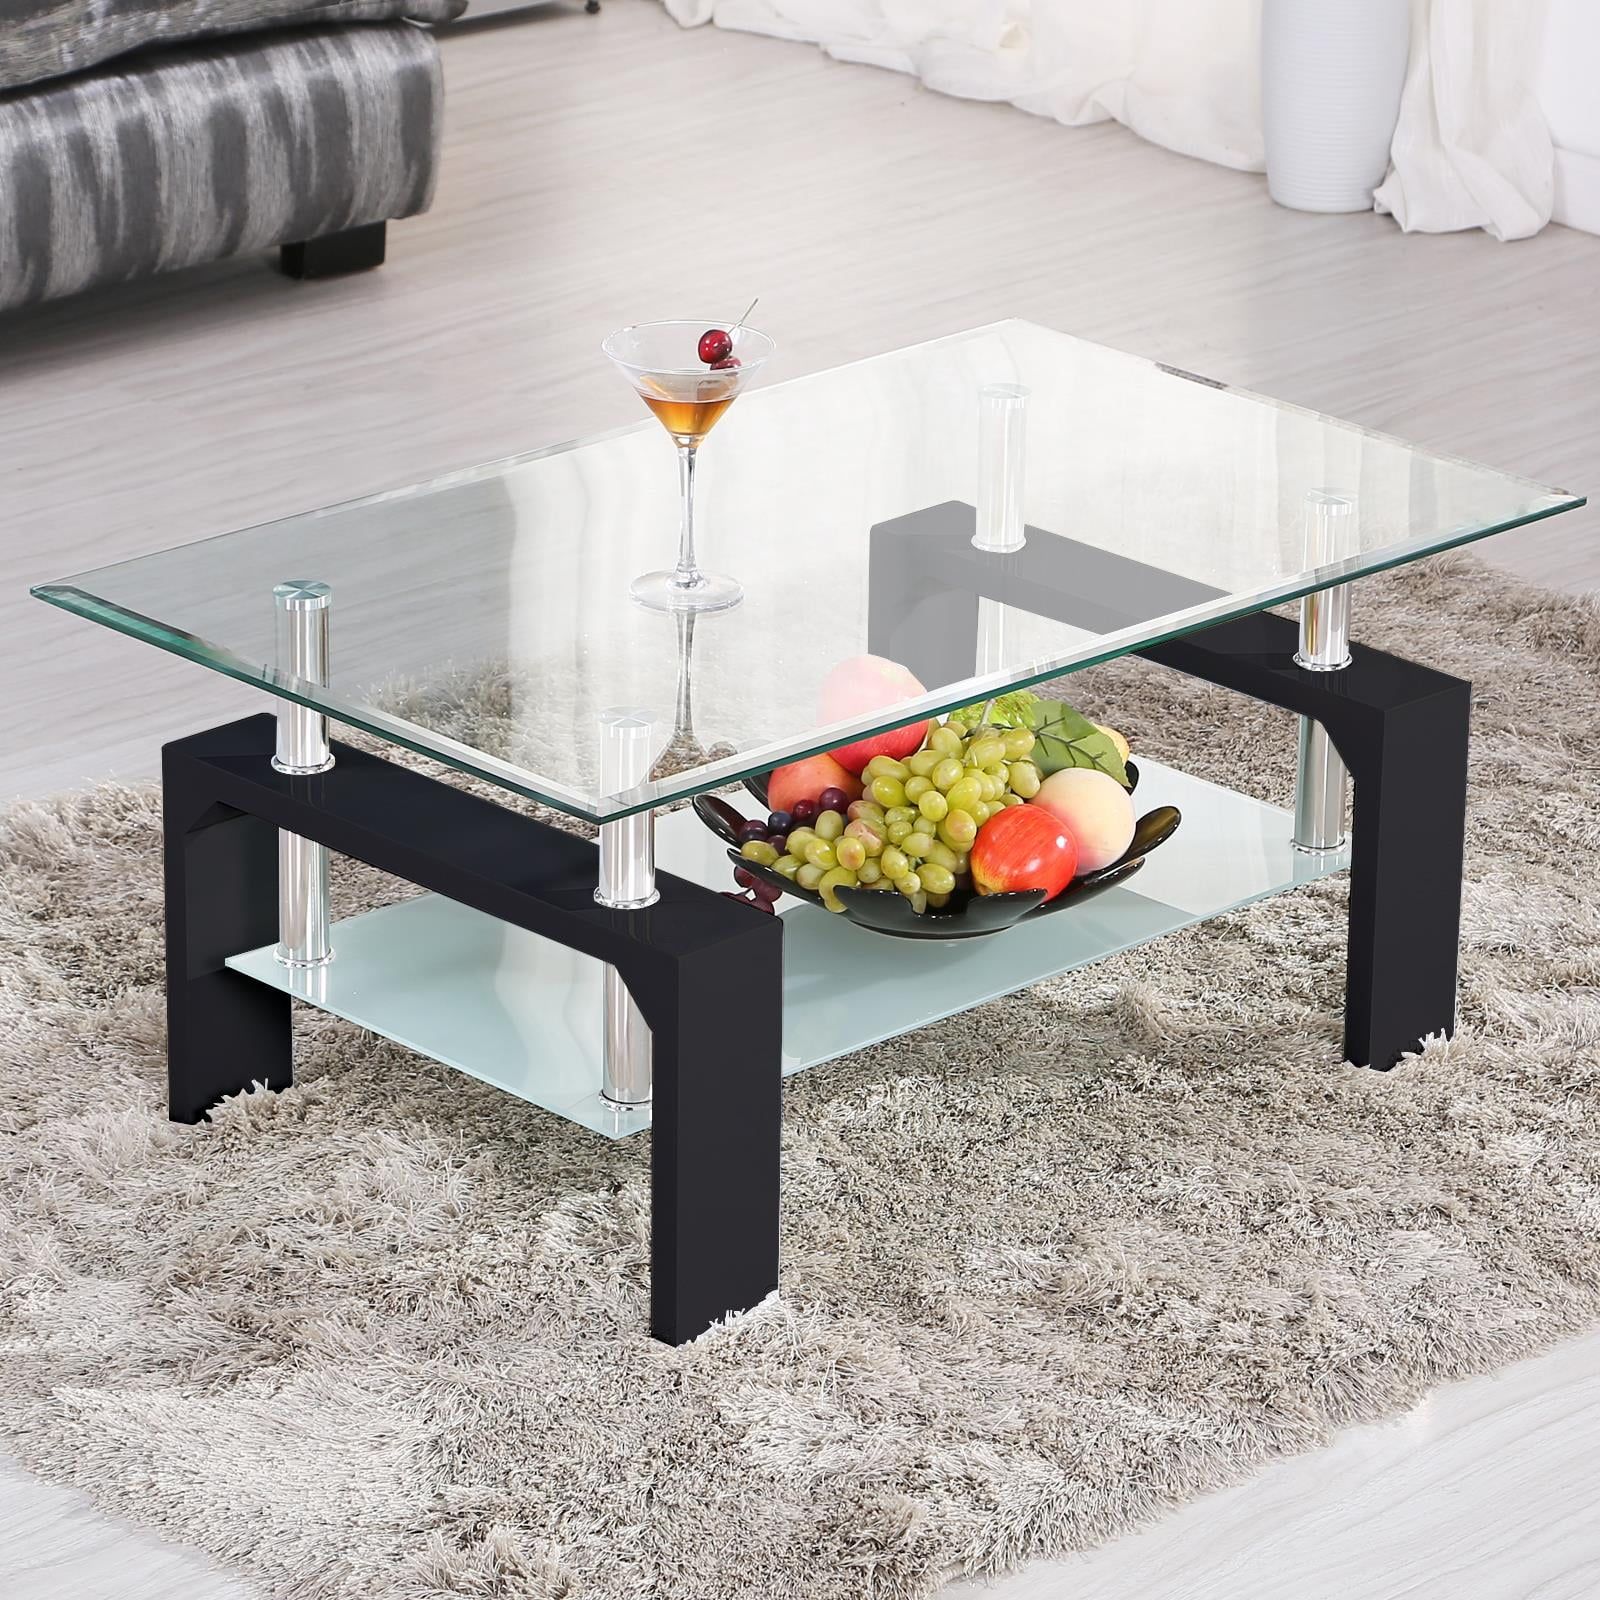 Ktaxon Rectangular Glass Coffee Table Shelf Wood Living Room Furniture Throughout Wood Tempered Glass Top Coffee Tables (View 13 of 20)